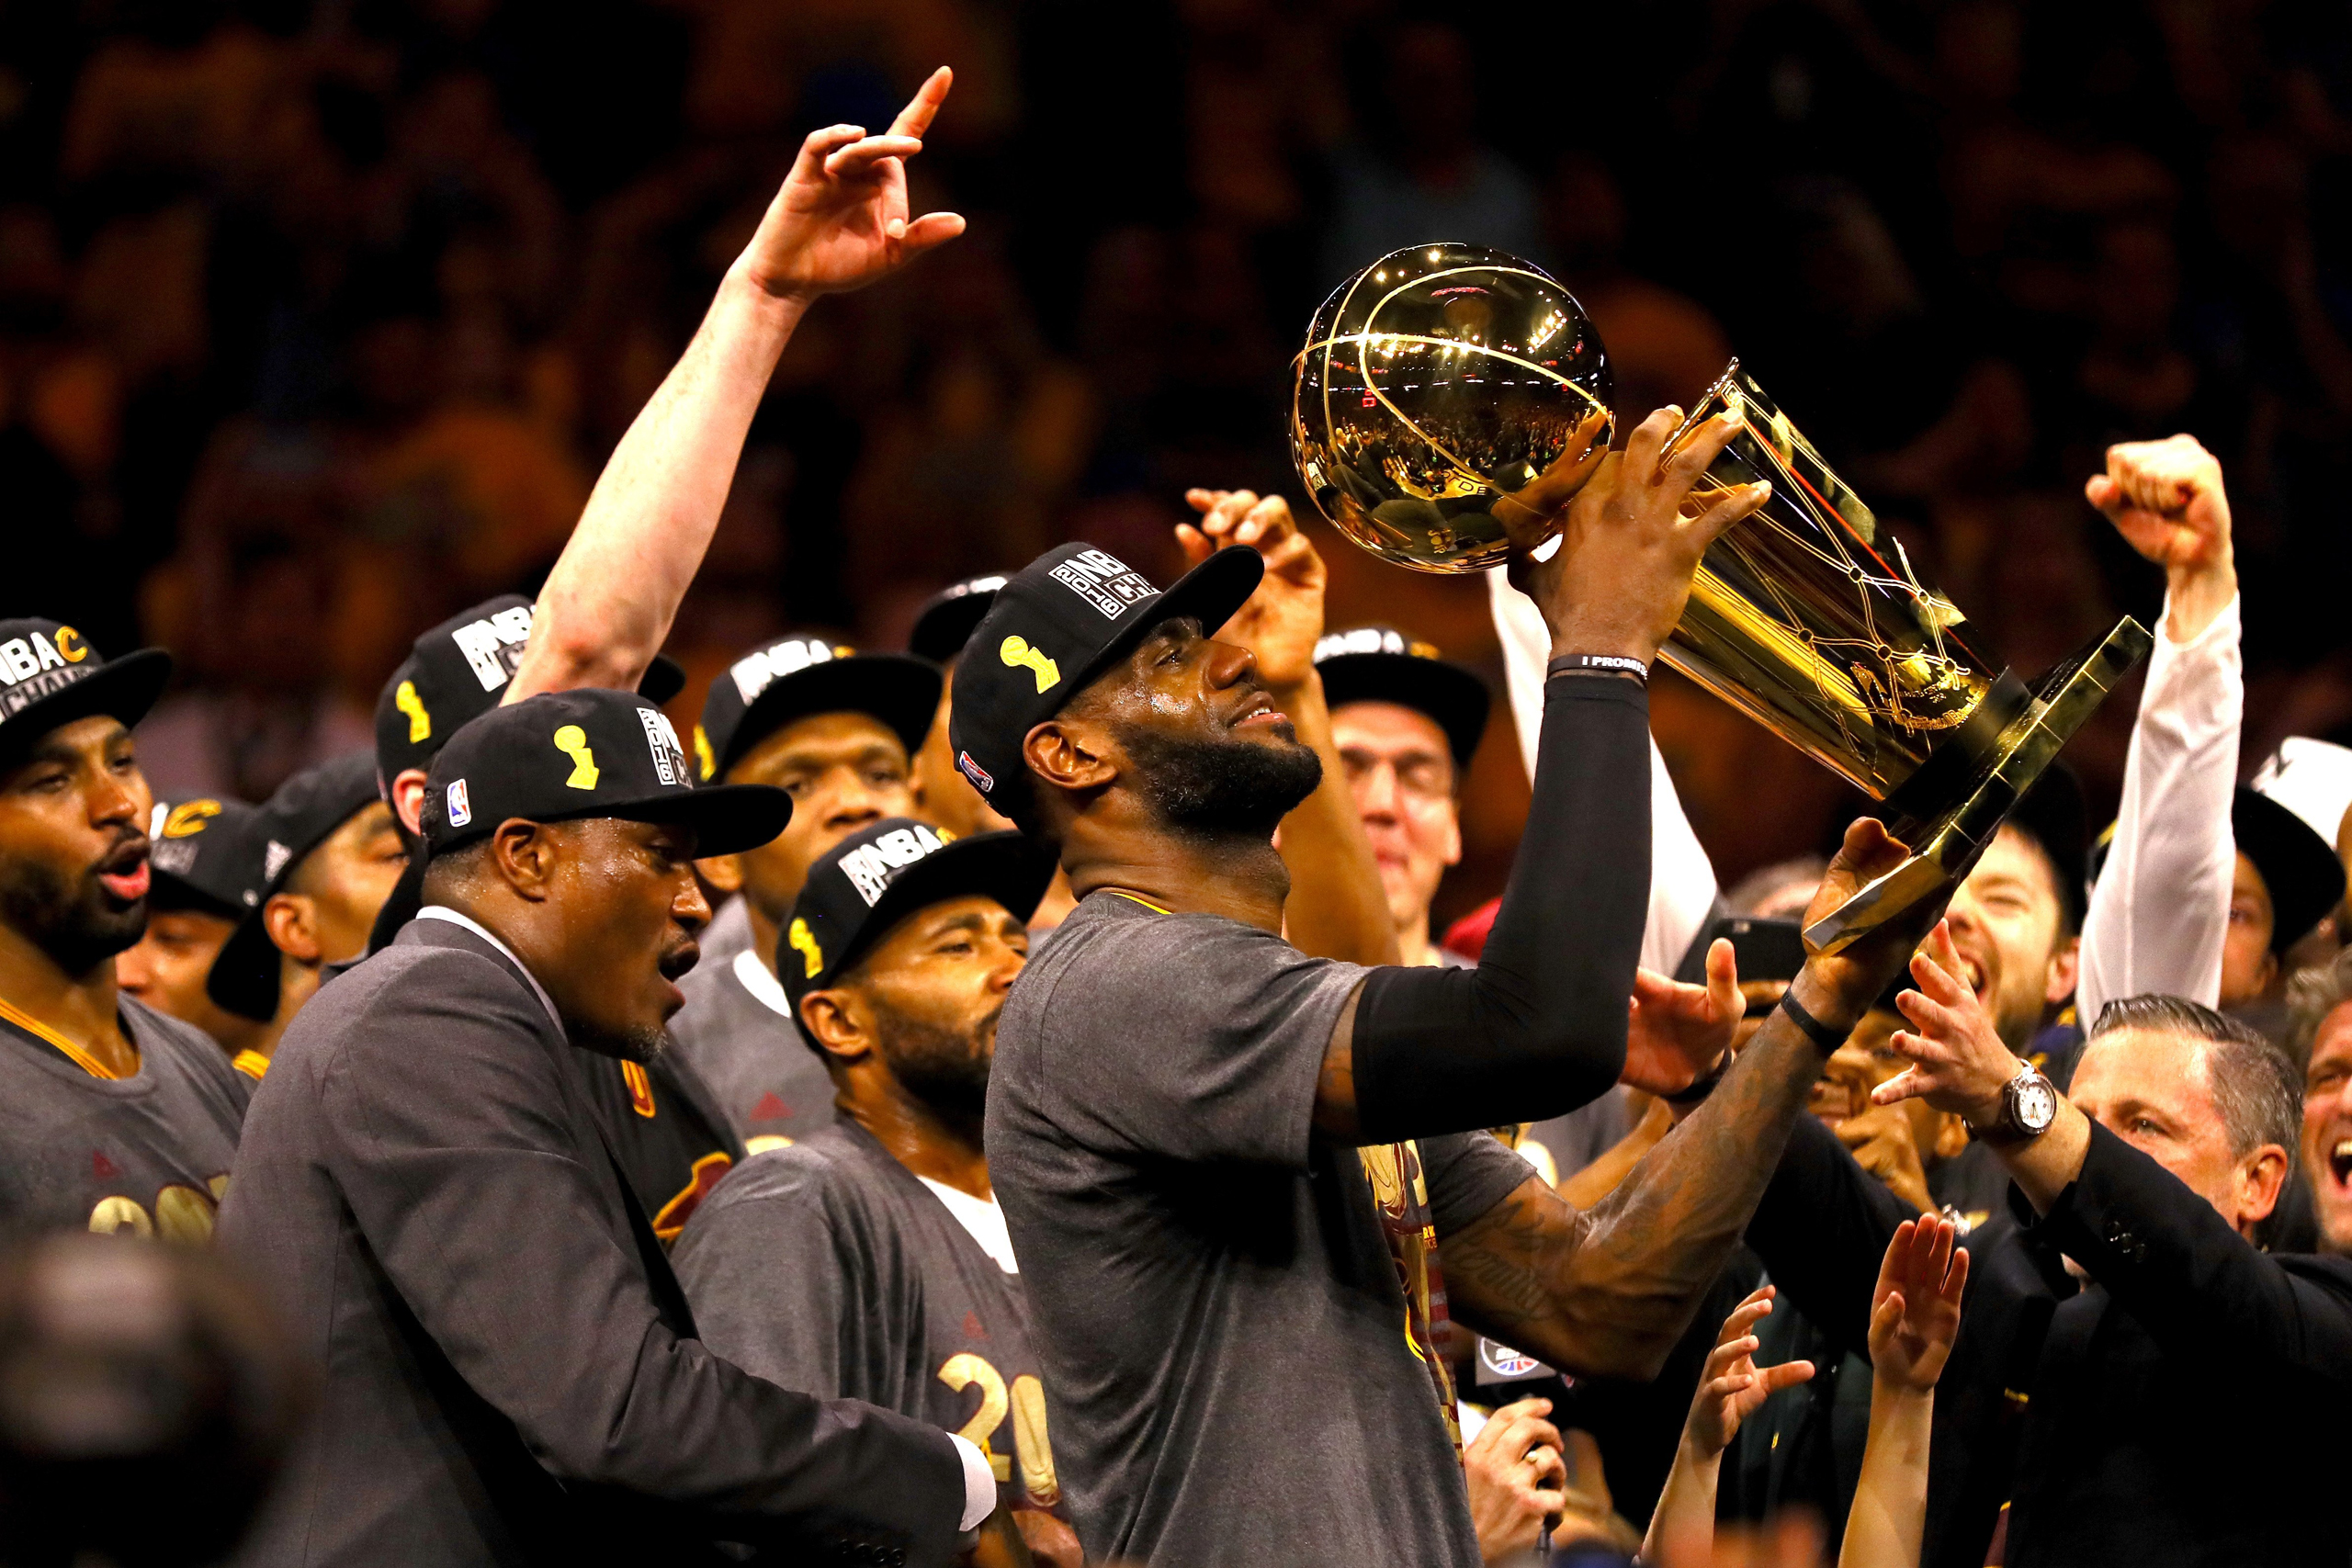 LeBron James #23 of the Cleveland Cavaliers holds the Larry O'Brien Championship Trophy after defeating the Golden State Warriors 93-89 in Game 7 of the 2016 NBA Finals at ORACLE Arena on June 19, 2016 in Oakland, California. NOTE TO USER: User expressly acknowledges and agrees that, by downloading and or using this photograph, User is consenting to the terms and conditions of the Getty Images License Agreement.  (Photo by Ezra Shaw/Getty Images) (Ezra Shaw—Getty Images)